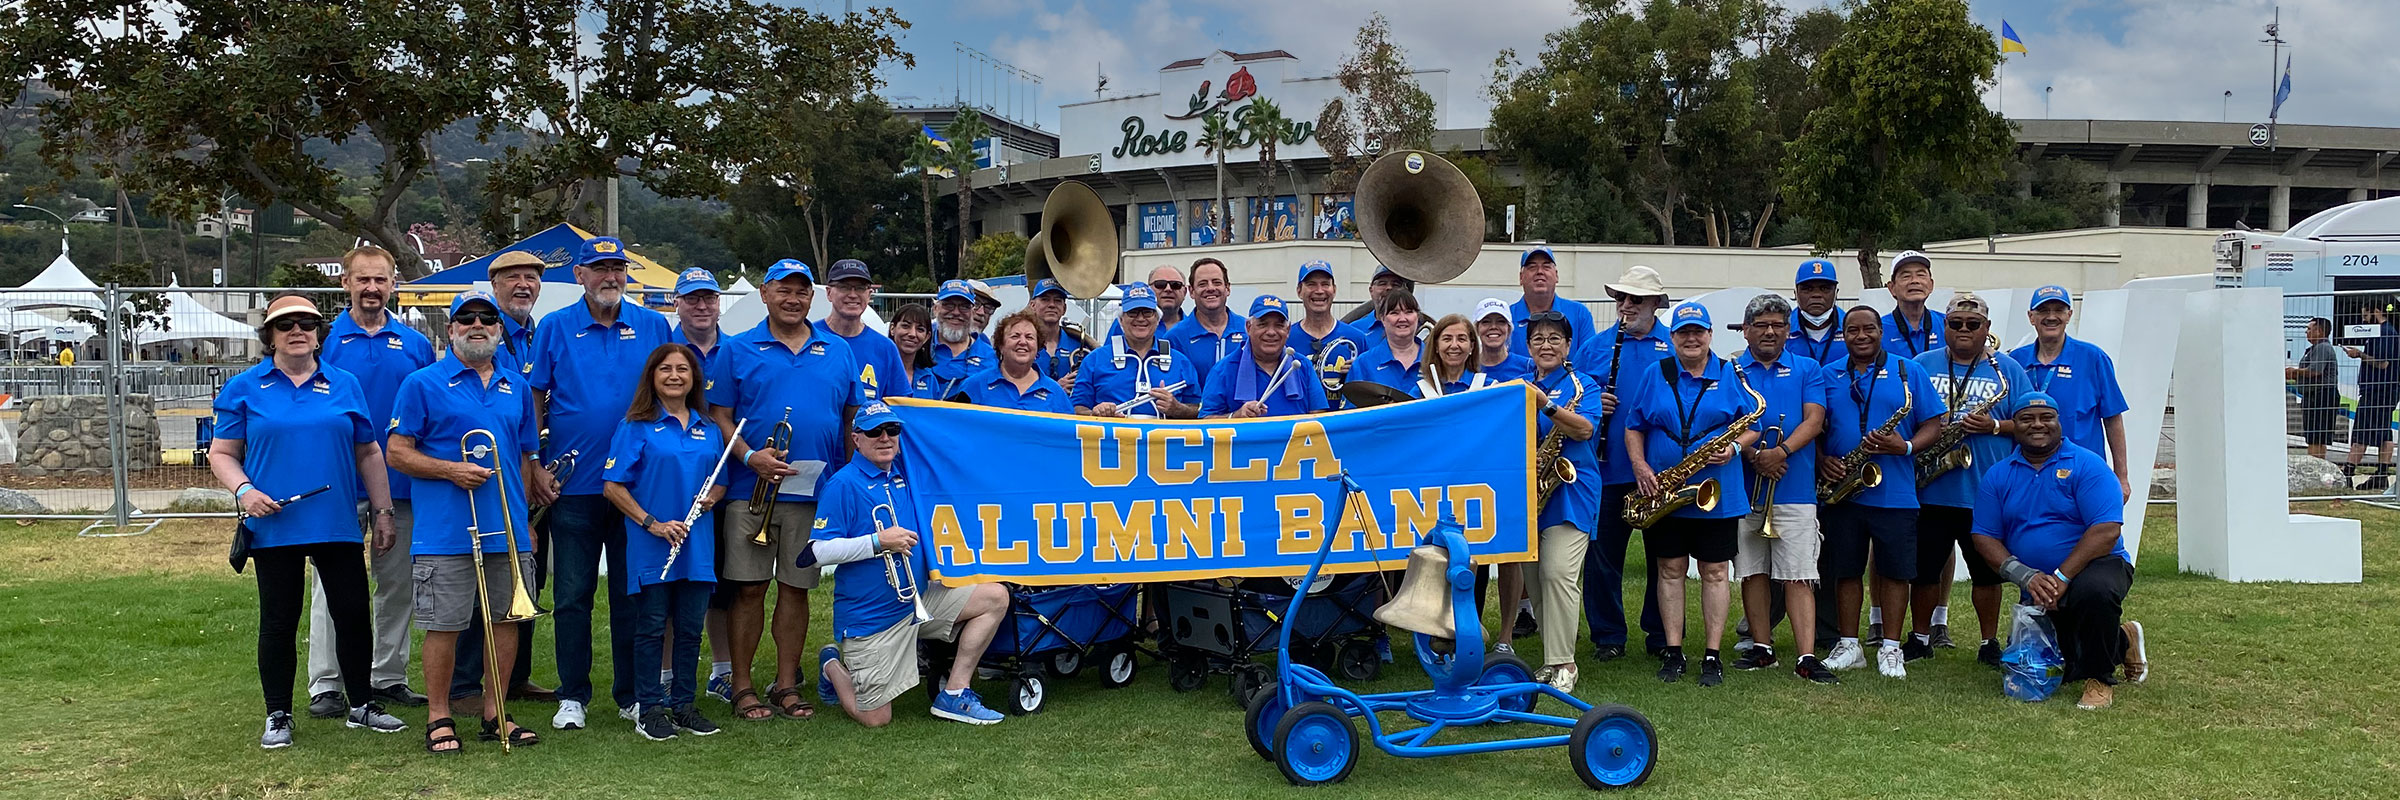 UCLA Alumni Band members standing in front of the Rose Bowl